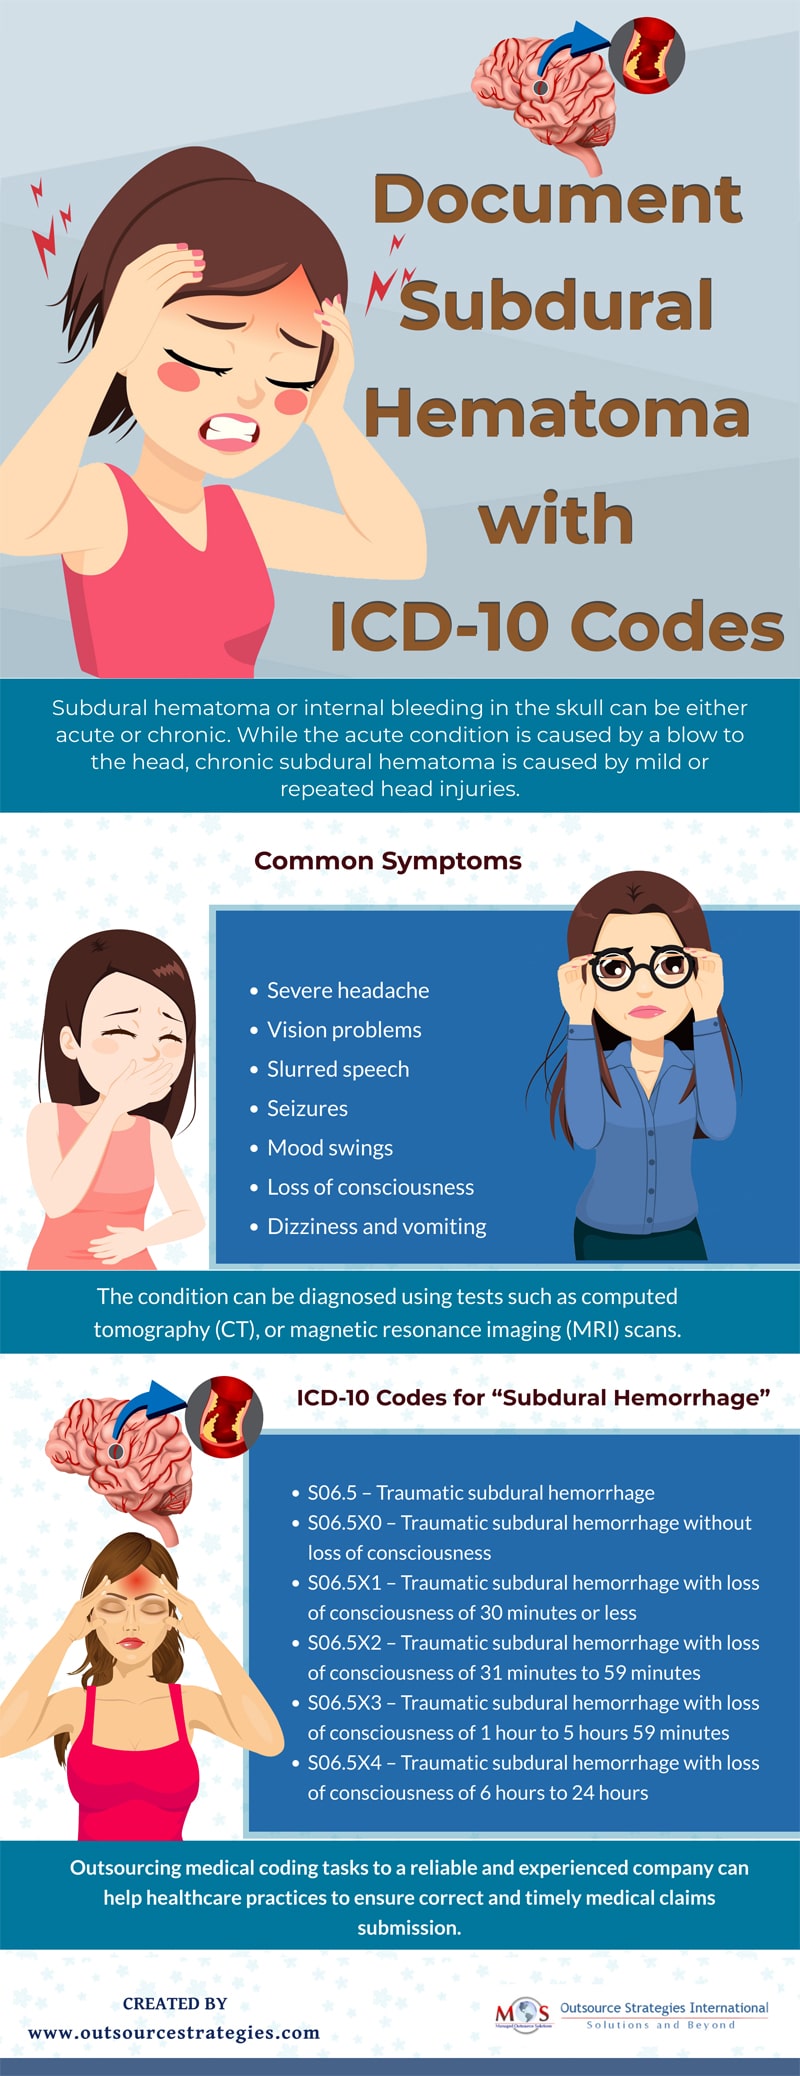 Document Subdural Hematoma with ICD-10 Codes